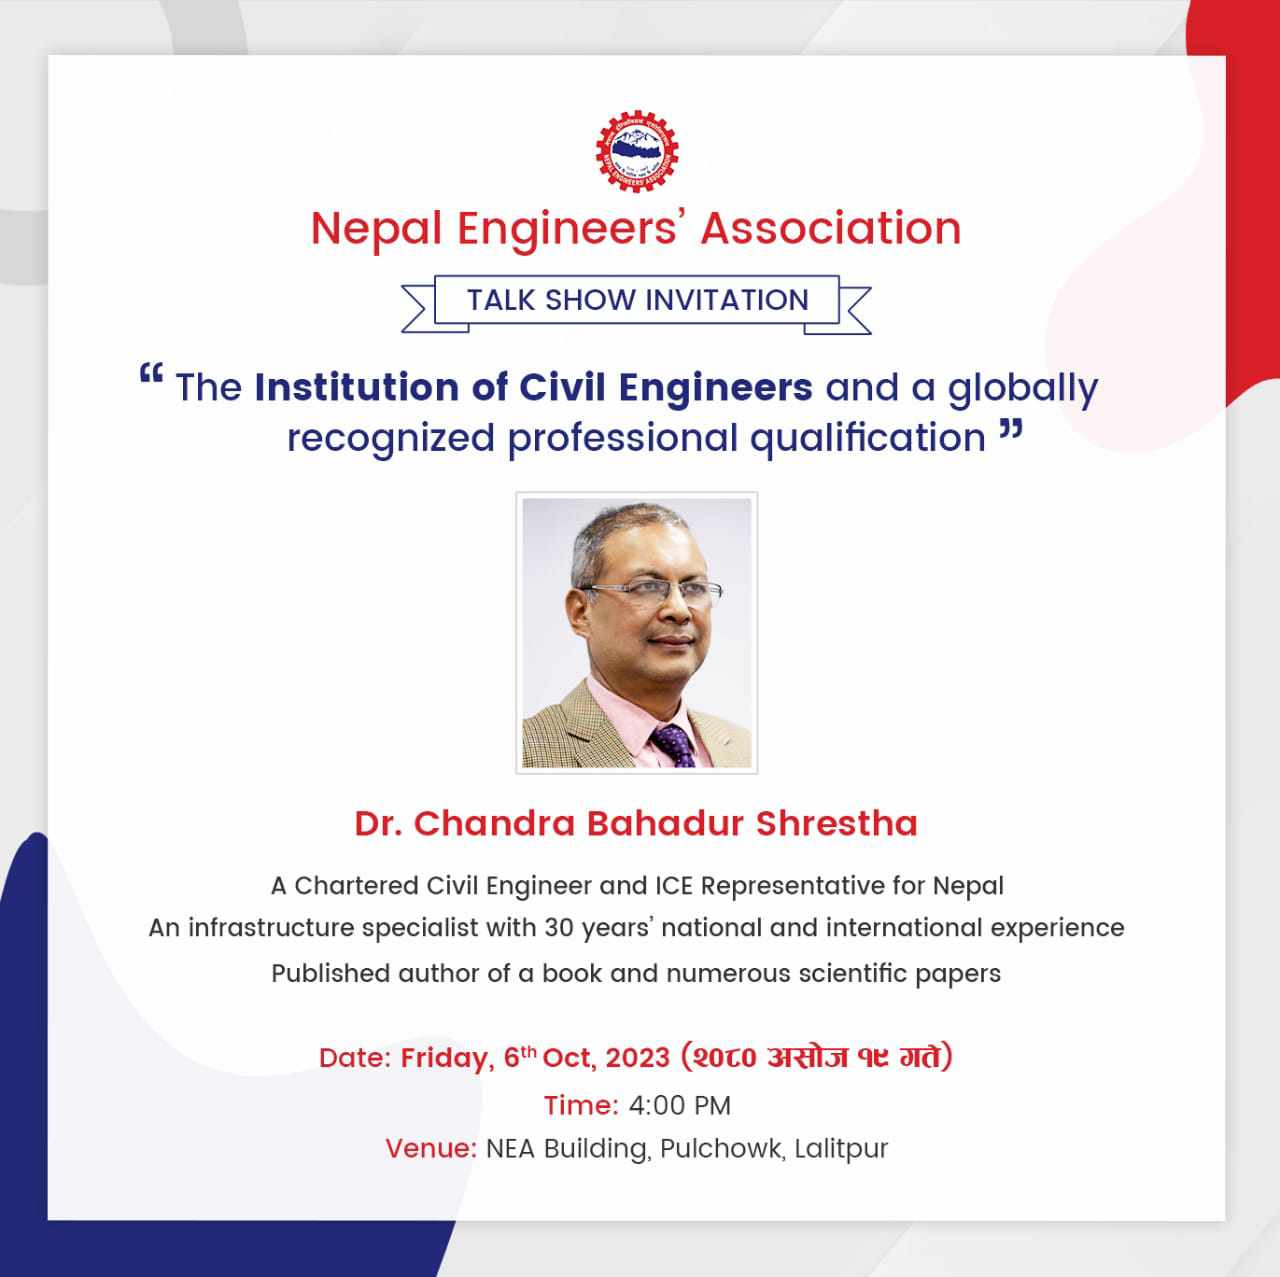 The Institution of Civil Engineers and Globally Recognized Professional Qualification